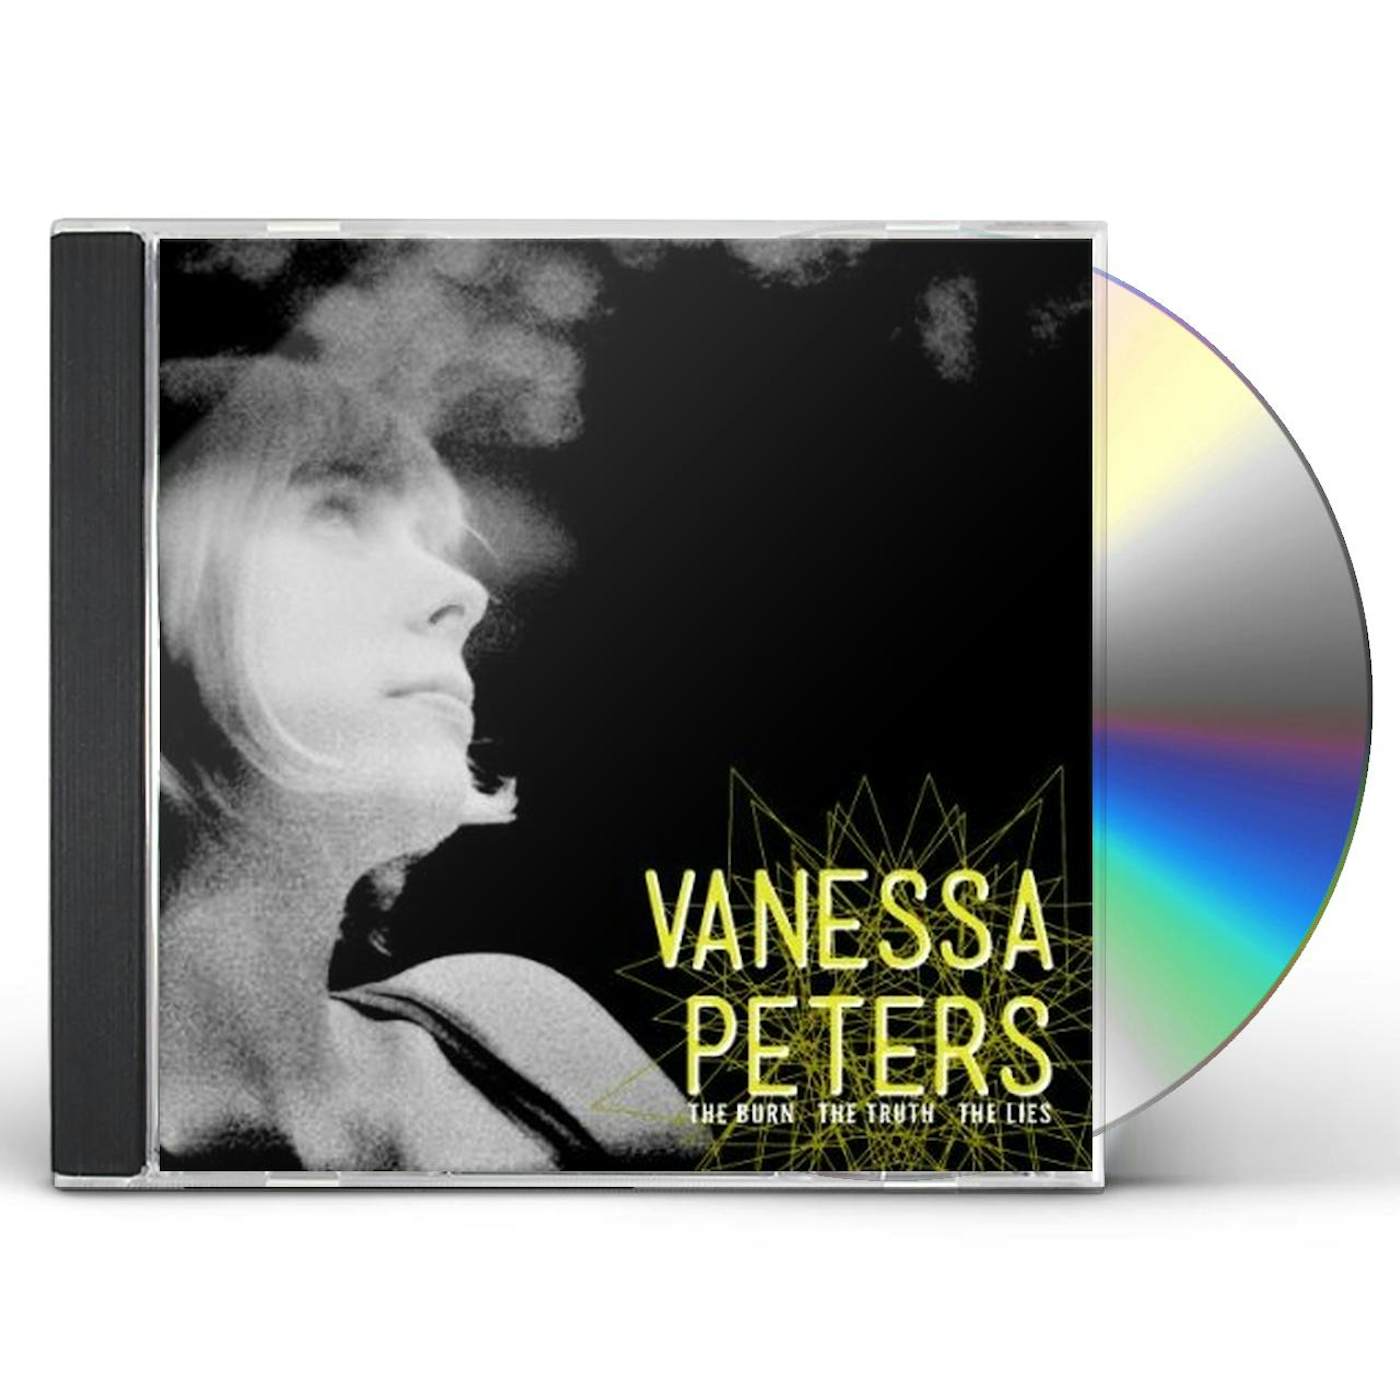 Vanessa Peters BURN THE TRUTH THE LIES CD